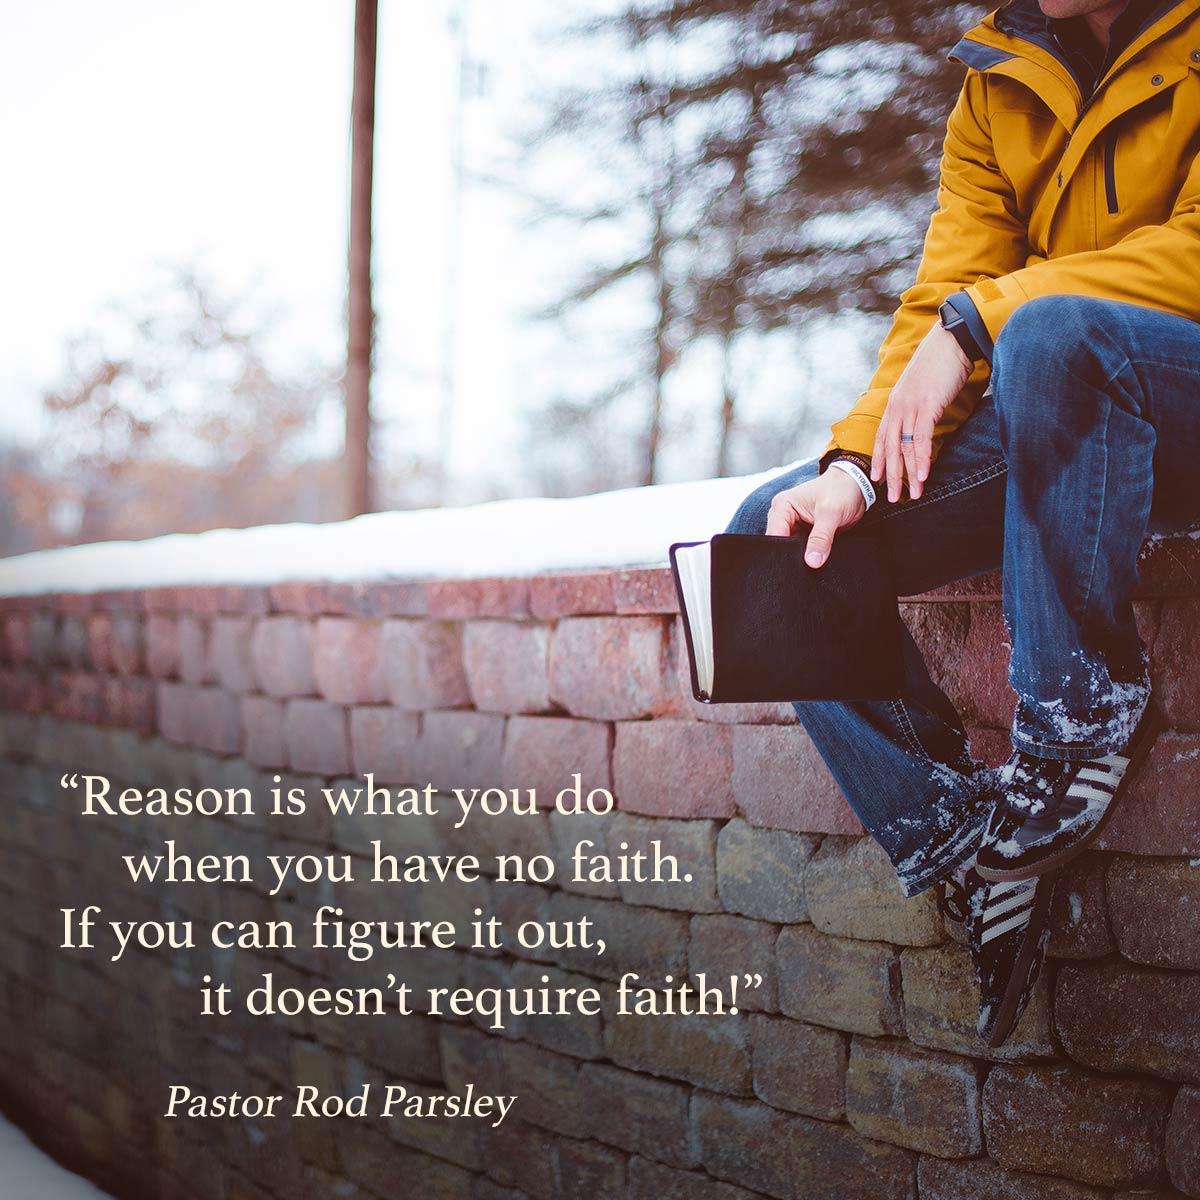 “Reason is what you do when you have no faith. If you can figure it out, it doesn’t require faith!” – Pastor Rod Parsley